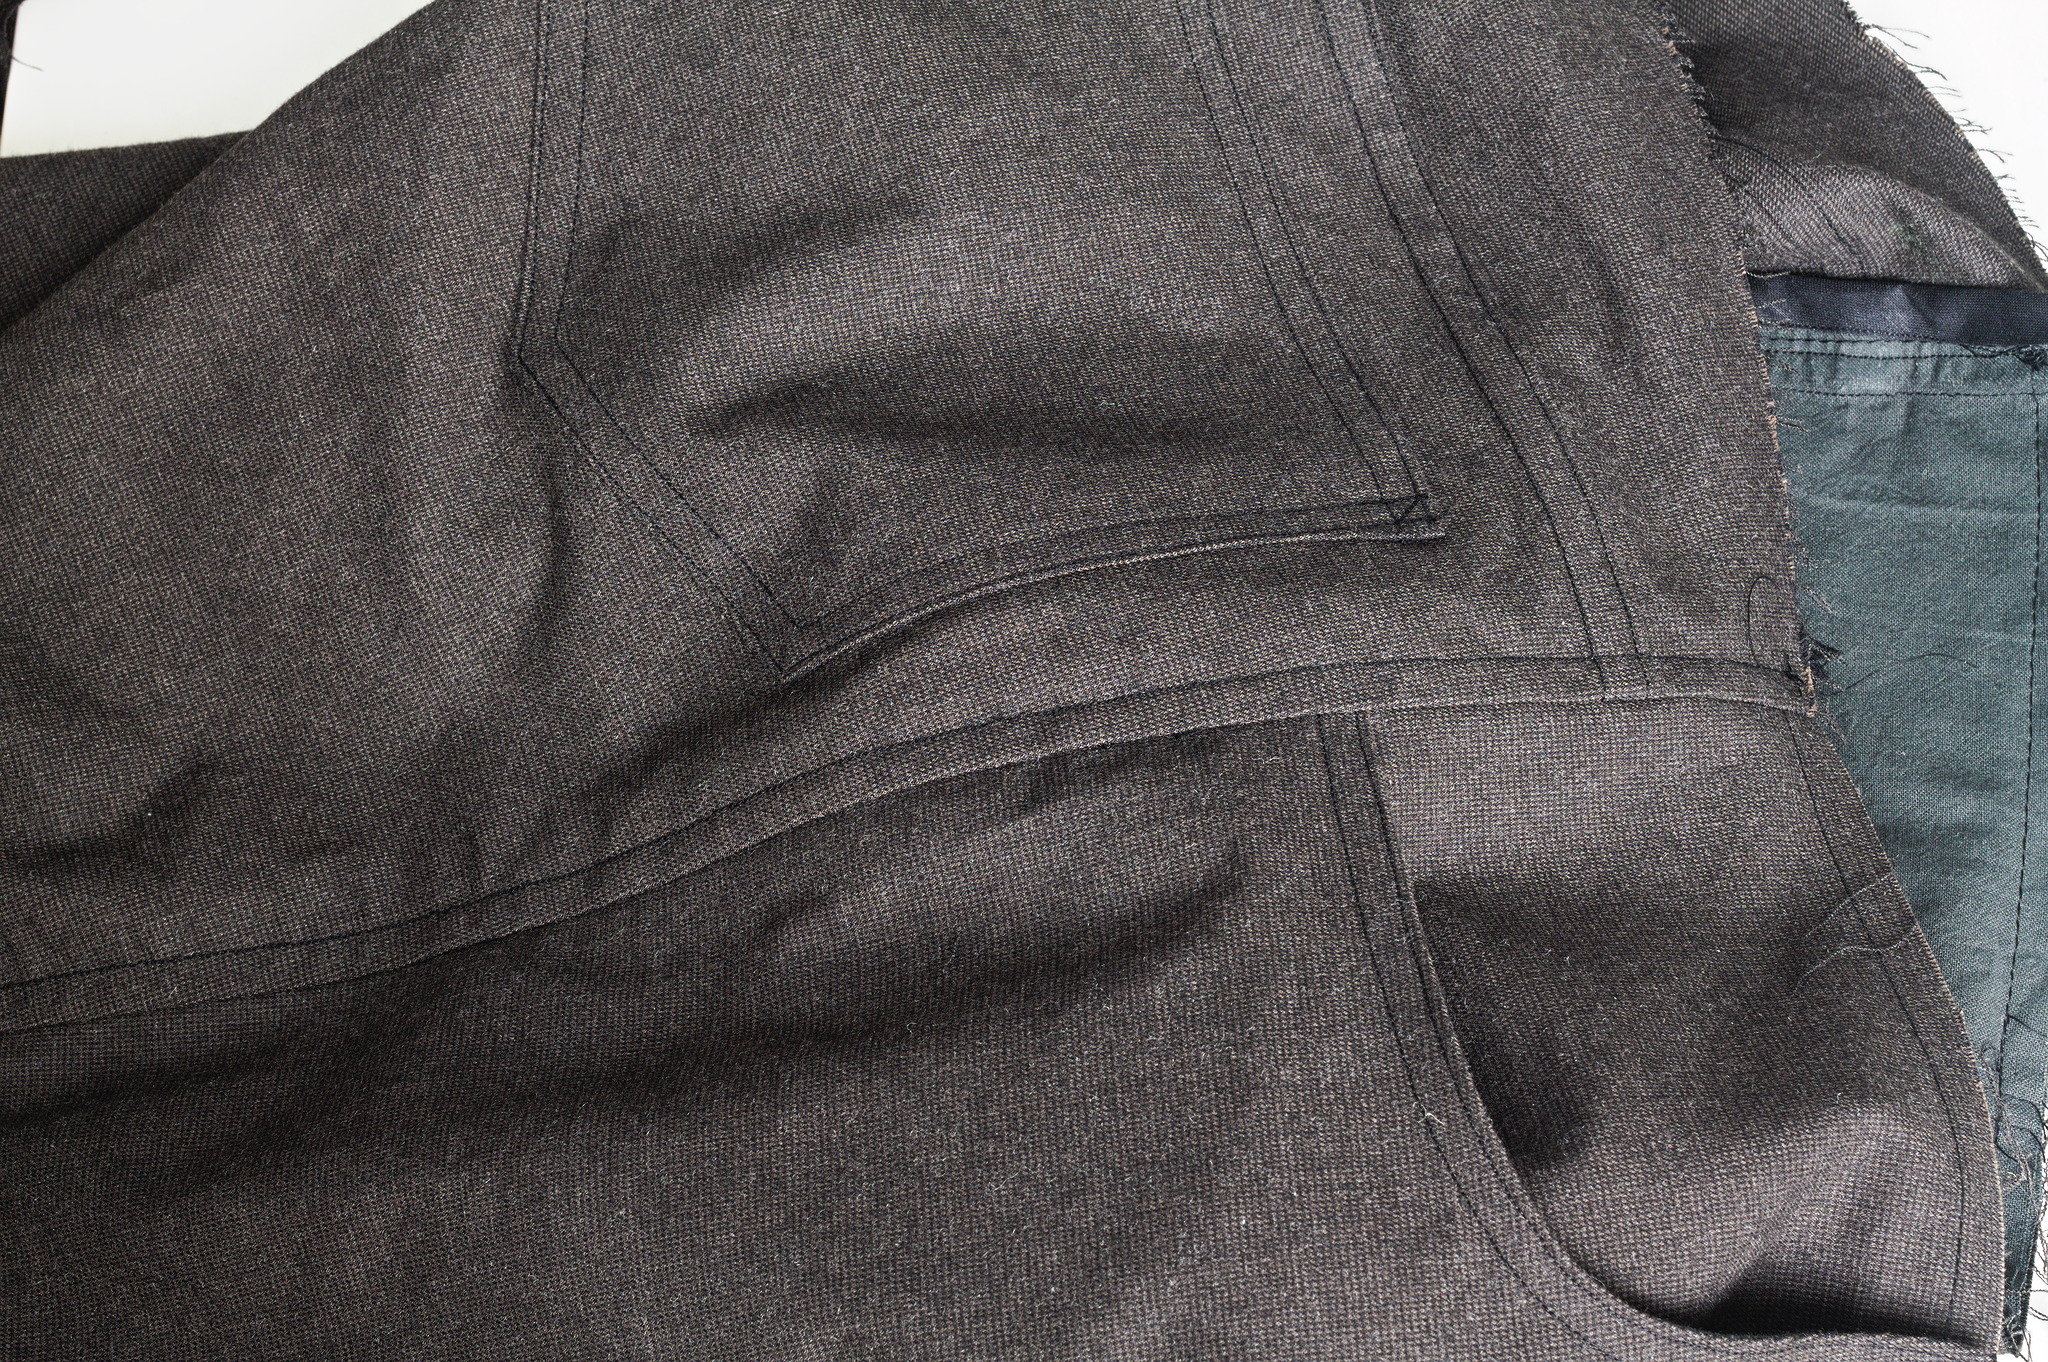 ../../../_images/0404-side_seam_topstitched.jpg